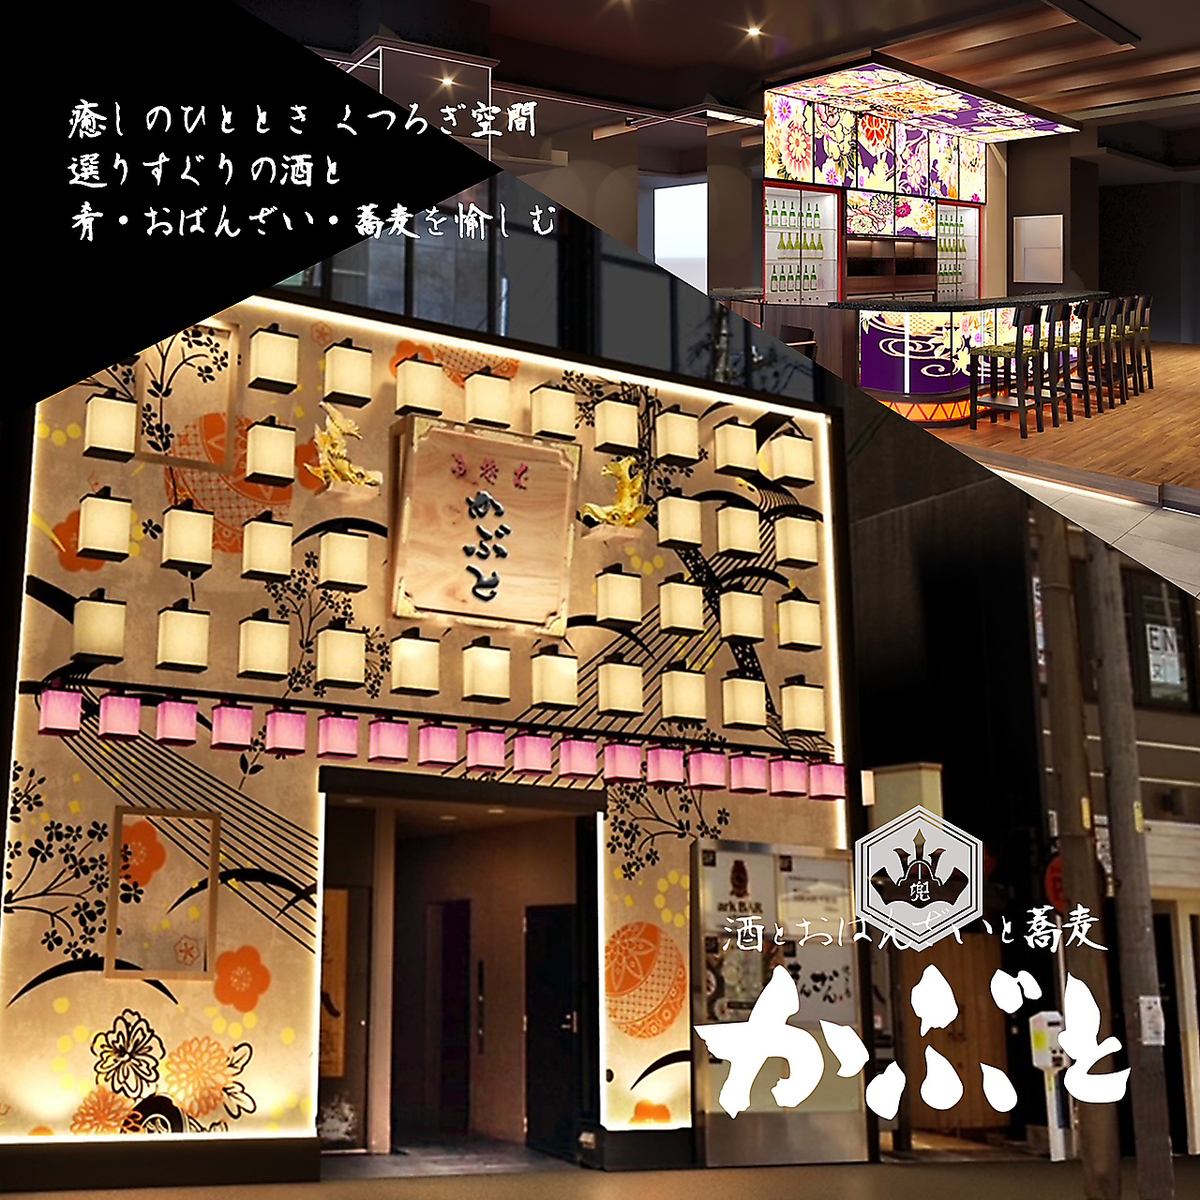 [5 minutes from Nagoya Station] We recommend carefully selected sake and highballs from soba restaurants